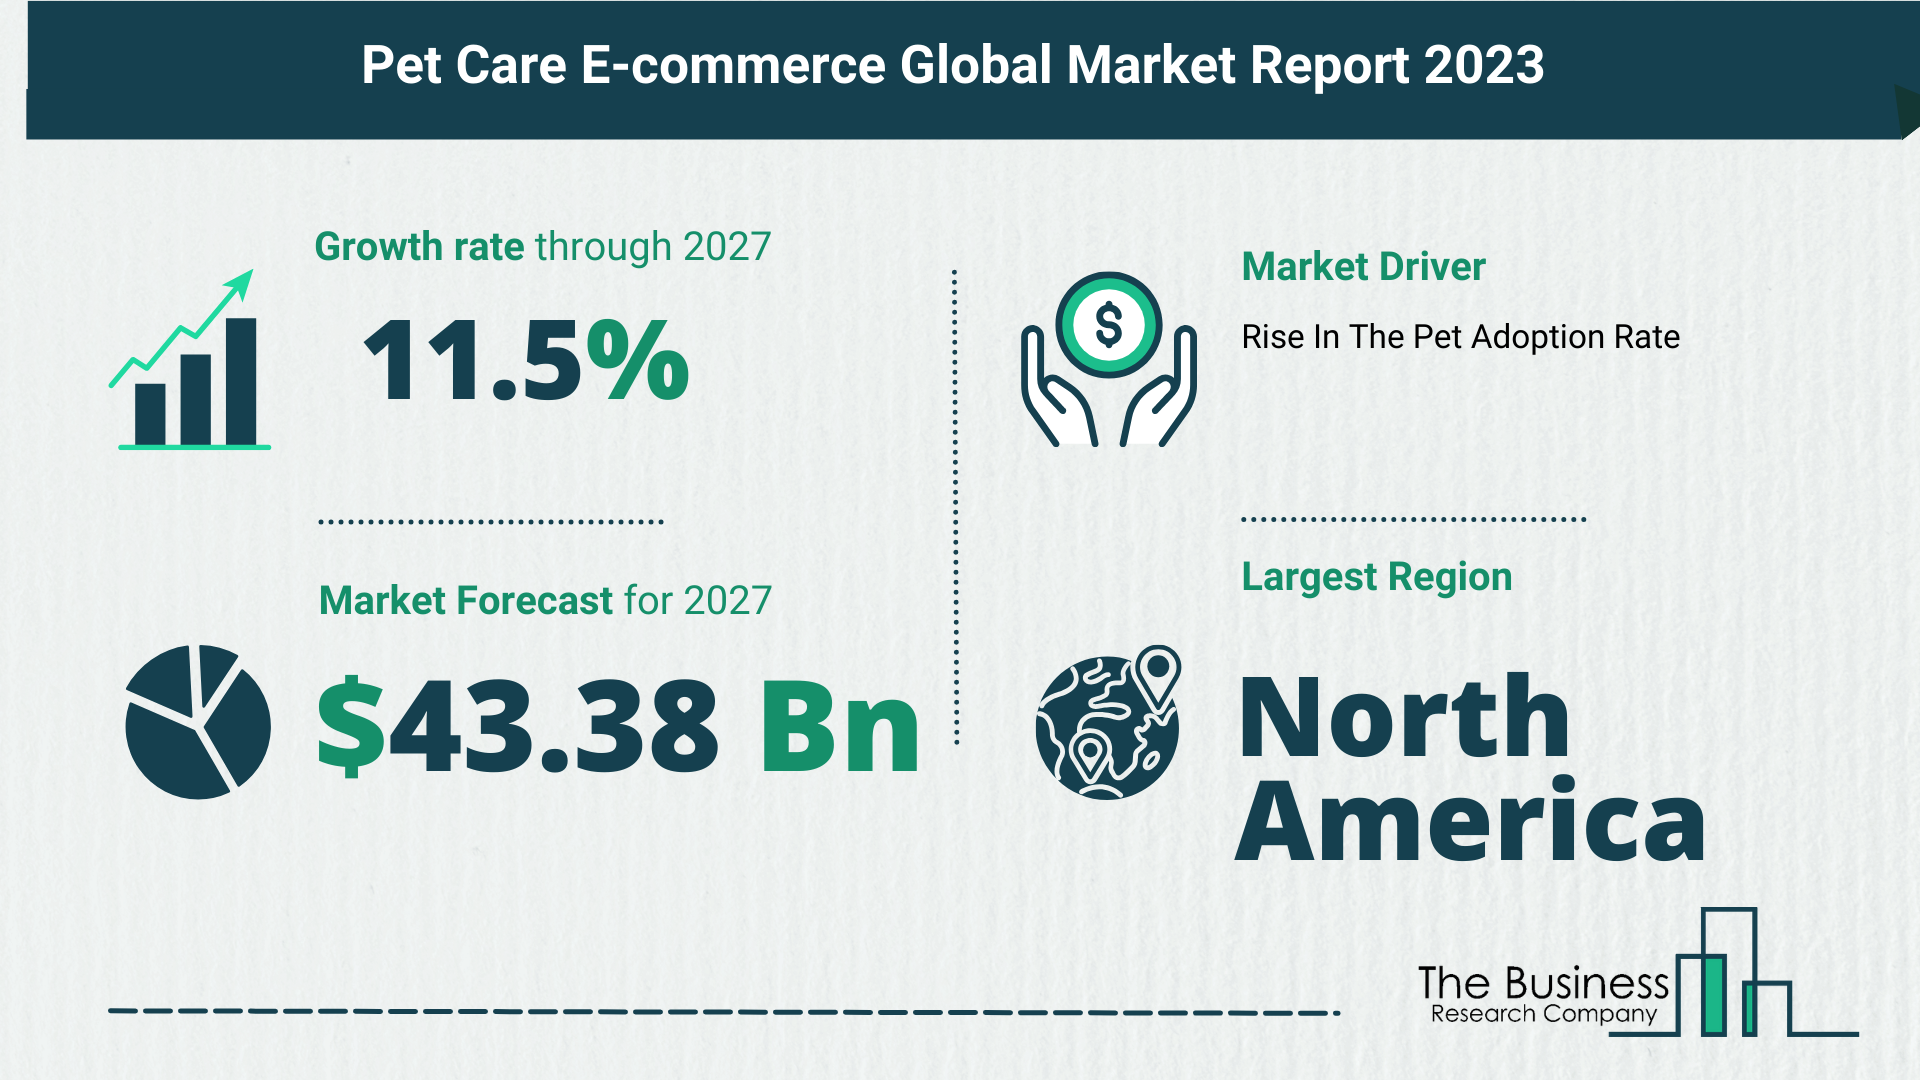 Top 5 Insights From The Pet Care E-commerce Market Report 2023